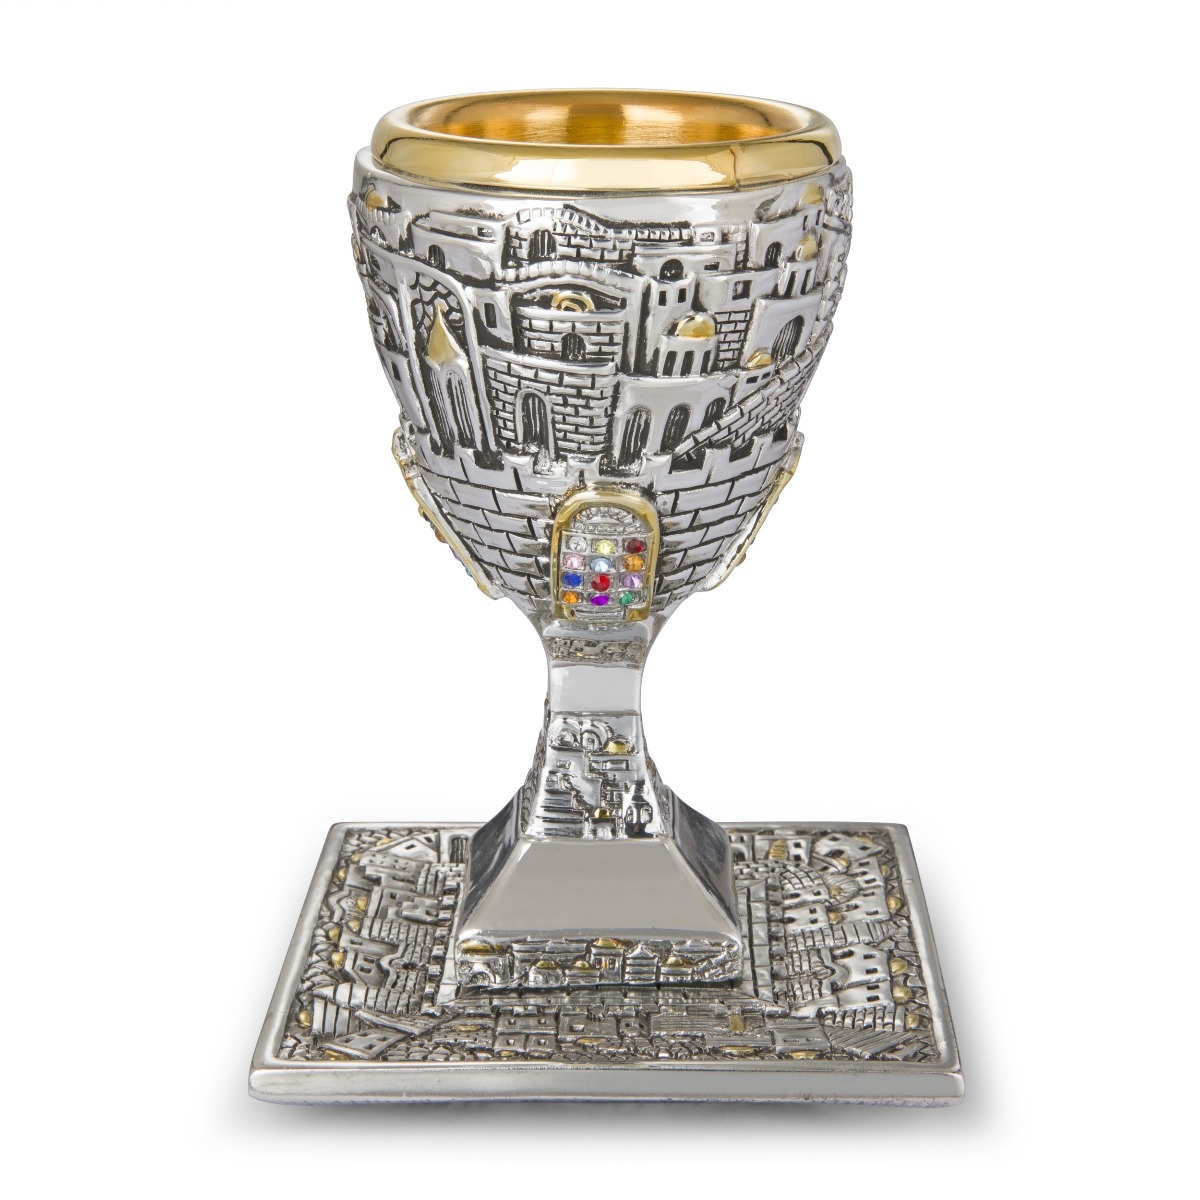 Silver-Plated Kiddush Cup Set With Gold-Accented Jerusalem and Hoshen Designs - 1